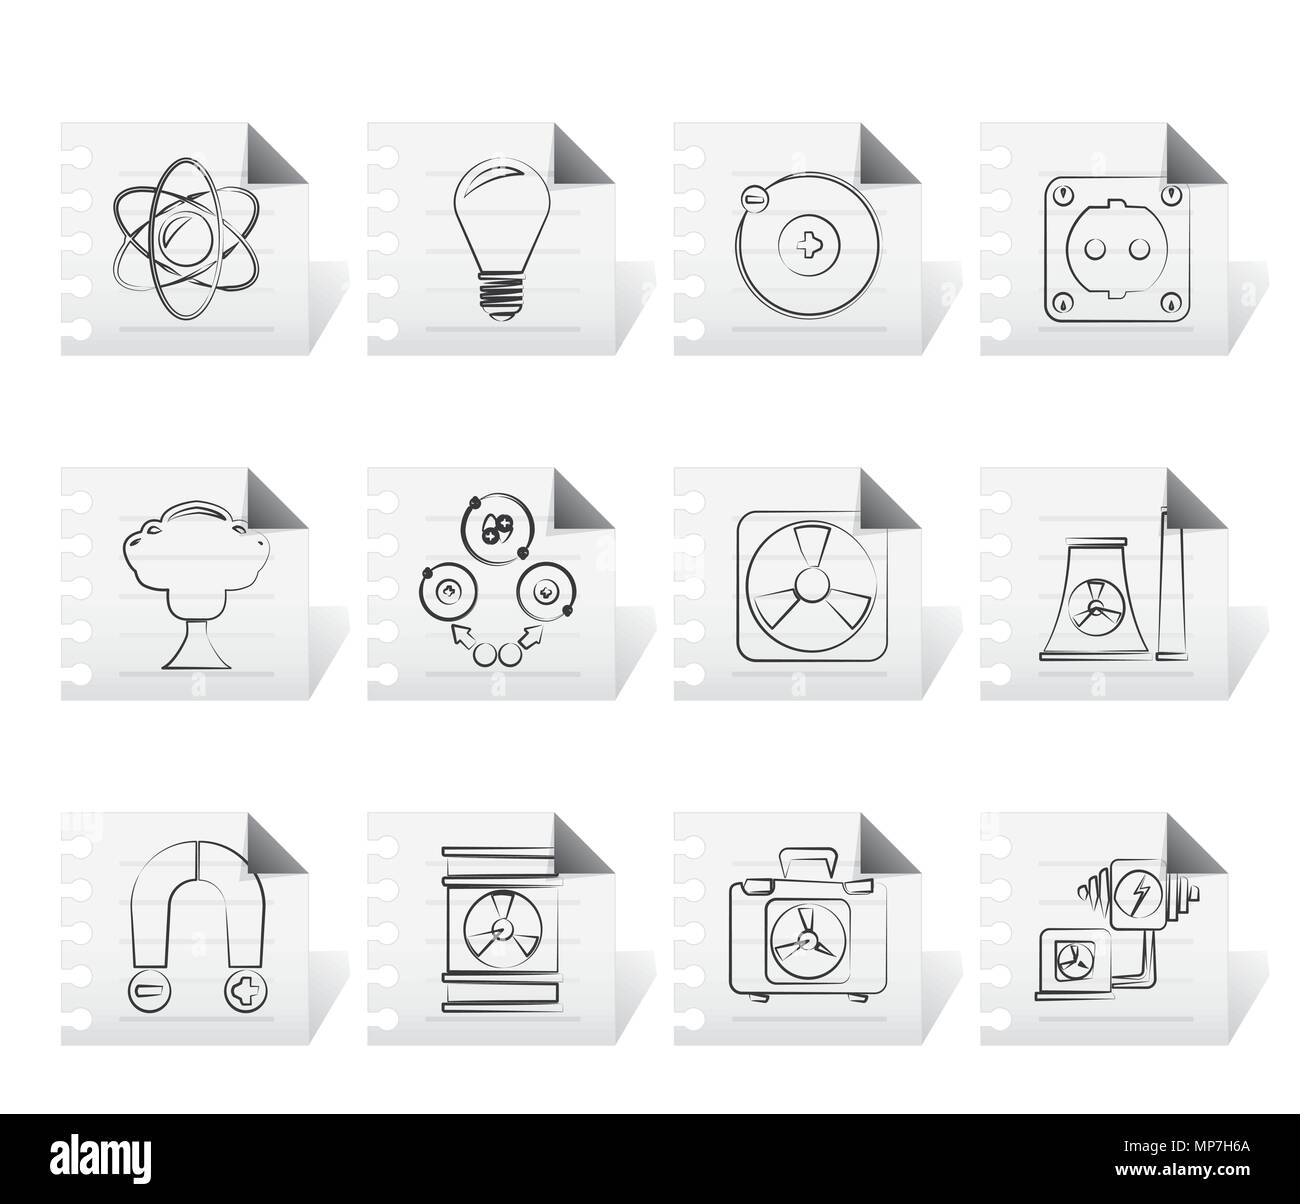 Atomic and Nuclear Energy Icons - vector icon set Stock Vector